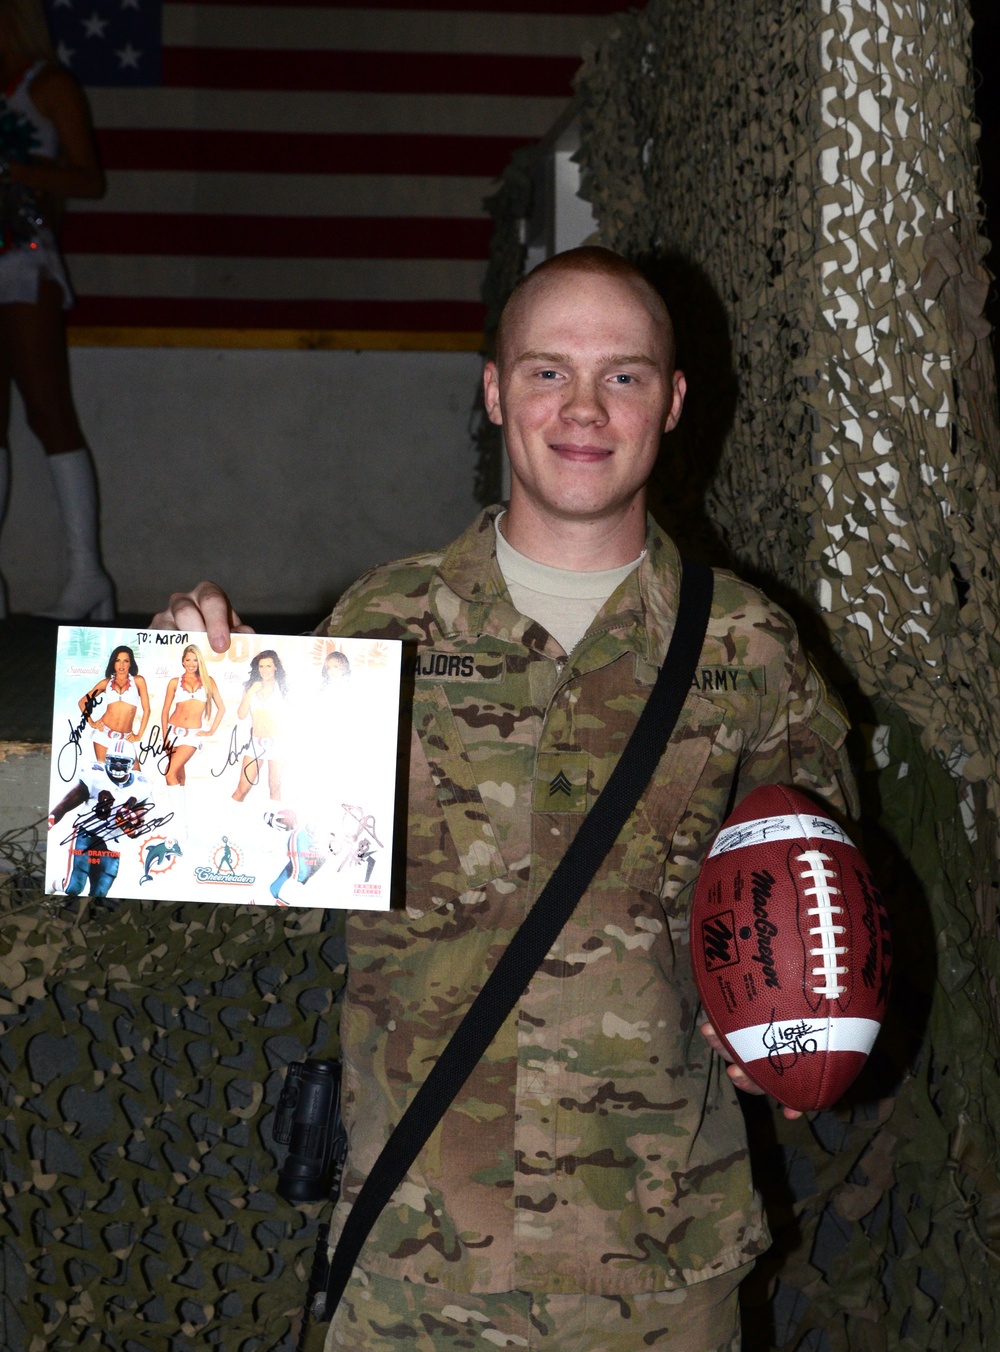 Cheer for troops: Miami Dolphins cheerleaders visit with, entertain troops at Bagram